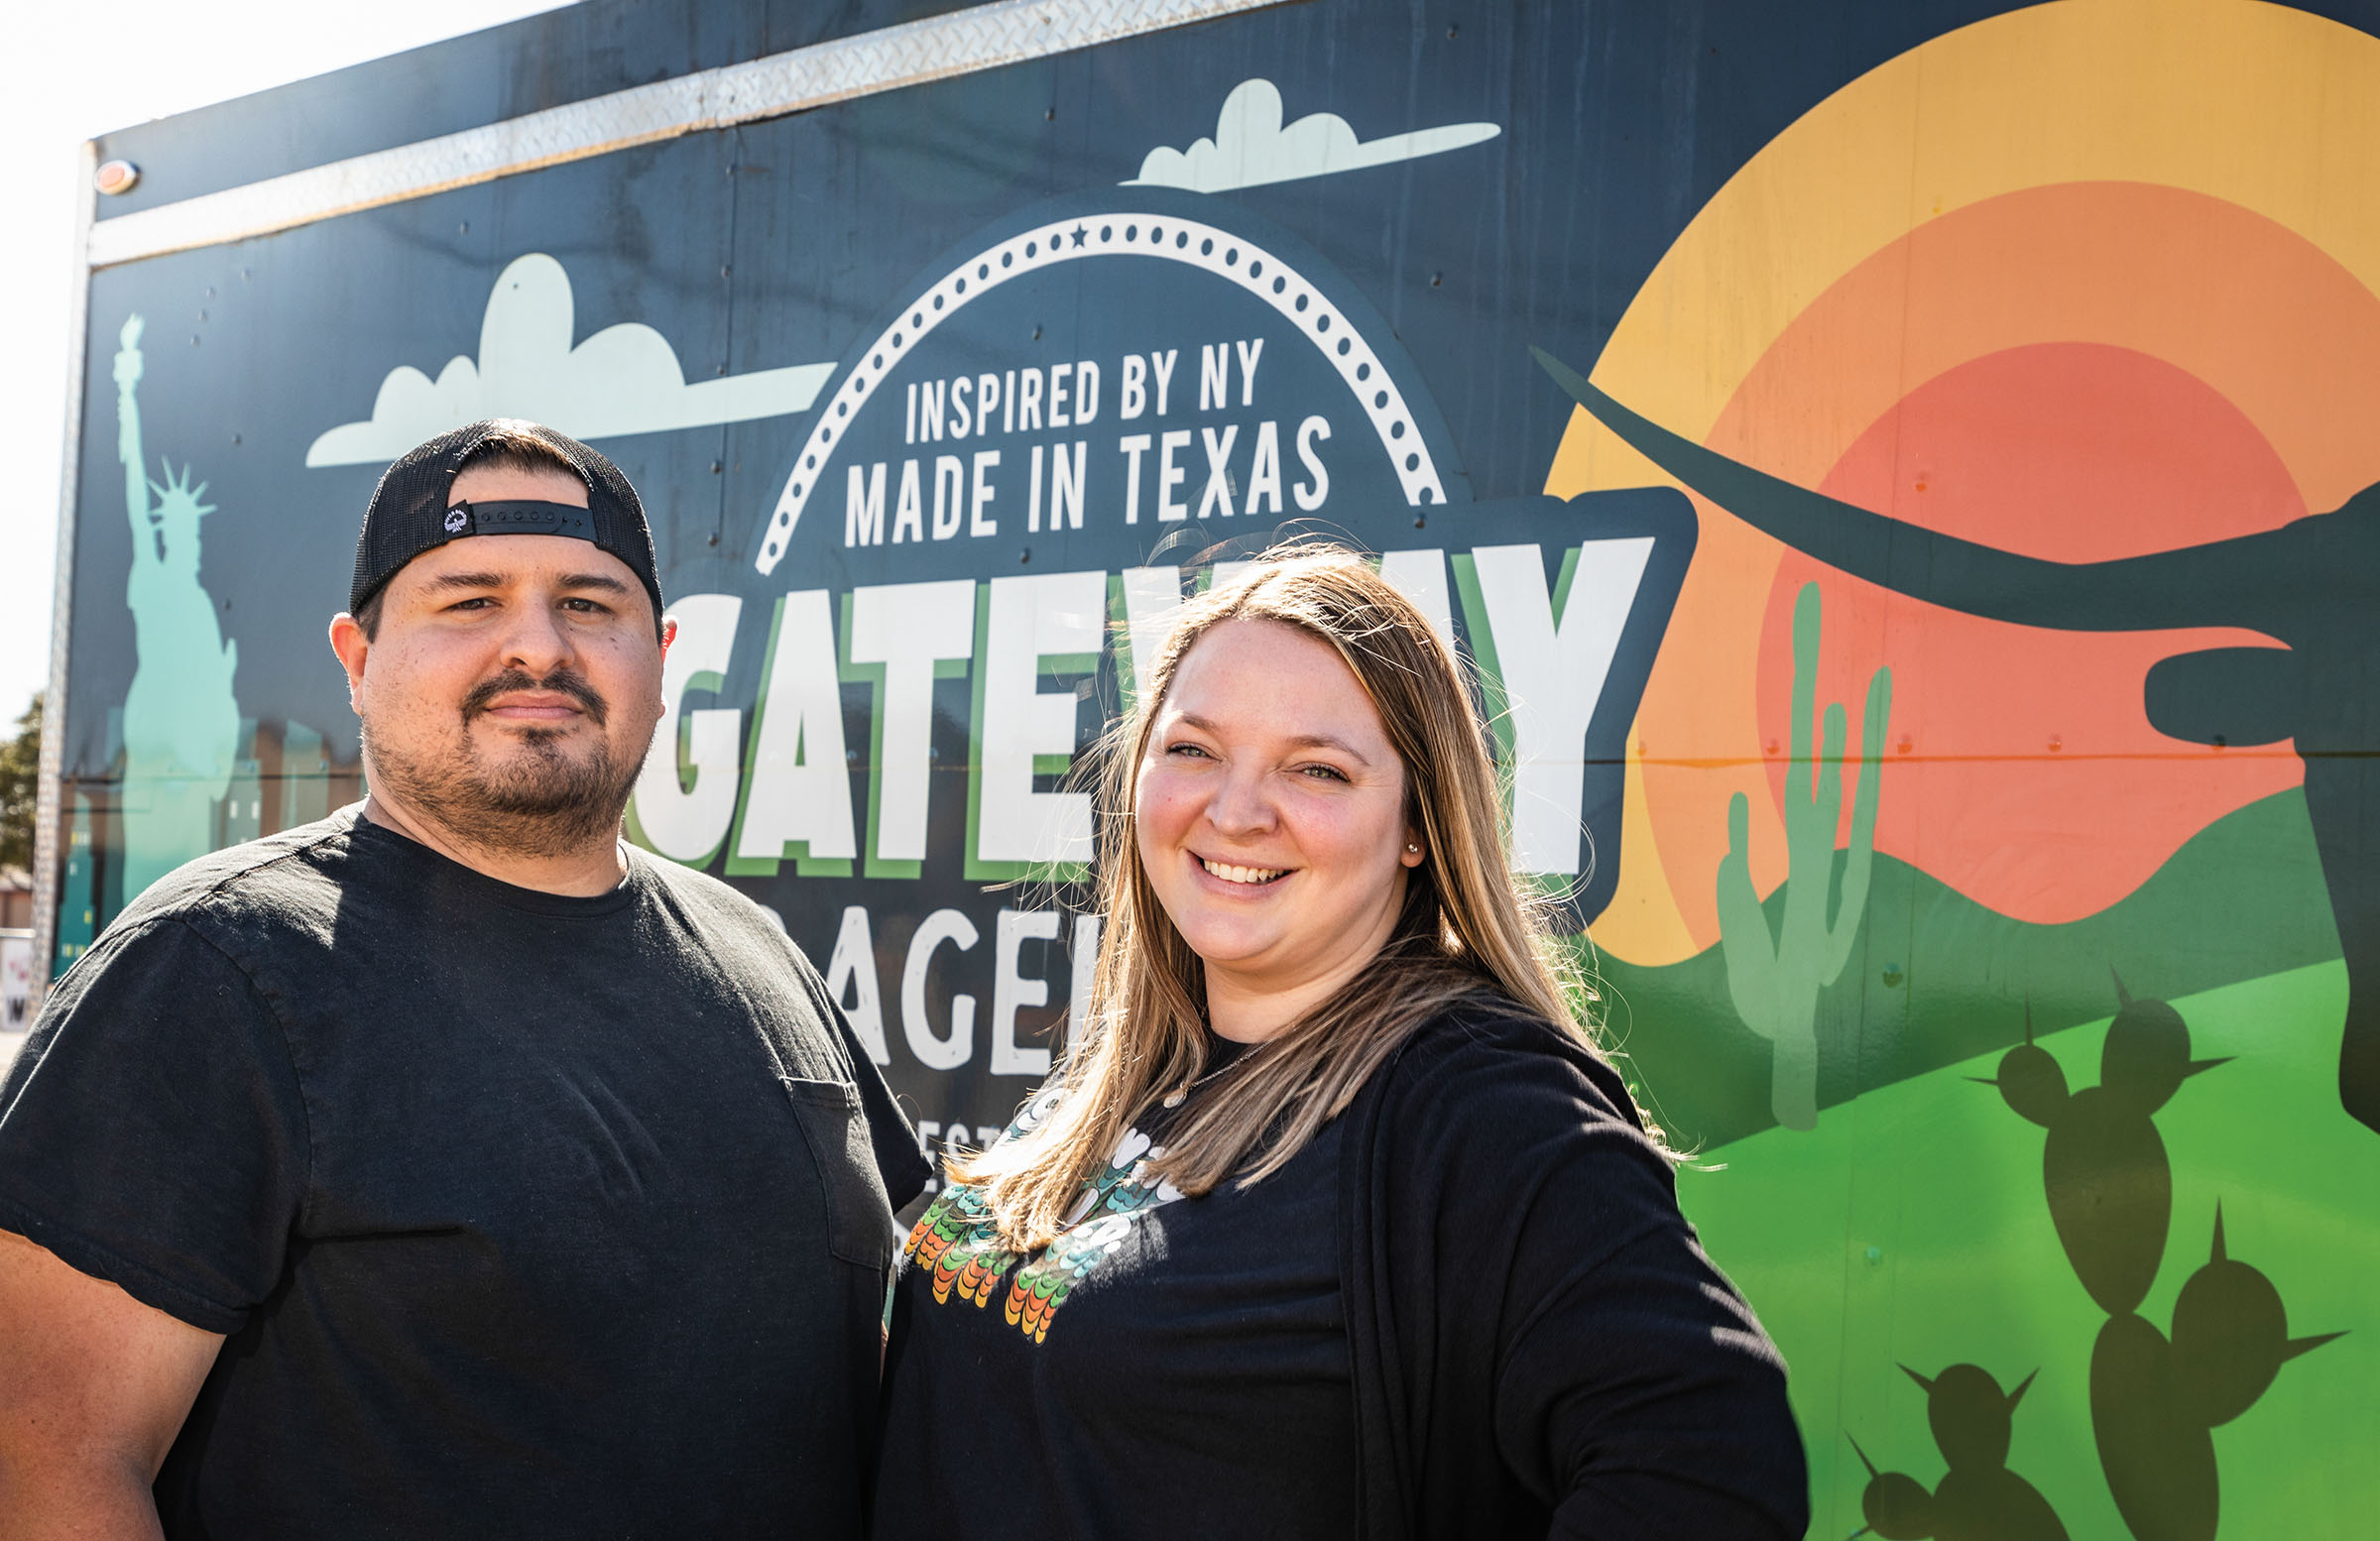 Two people in black shirts stand in front of a large mural that says "Inspired by NY, Made in Texas, Gateway Bagel Co"